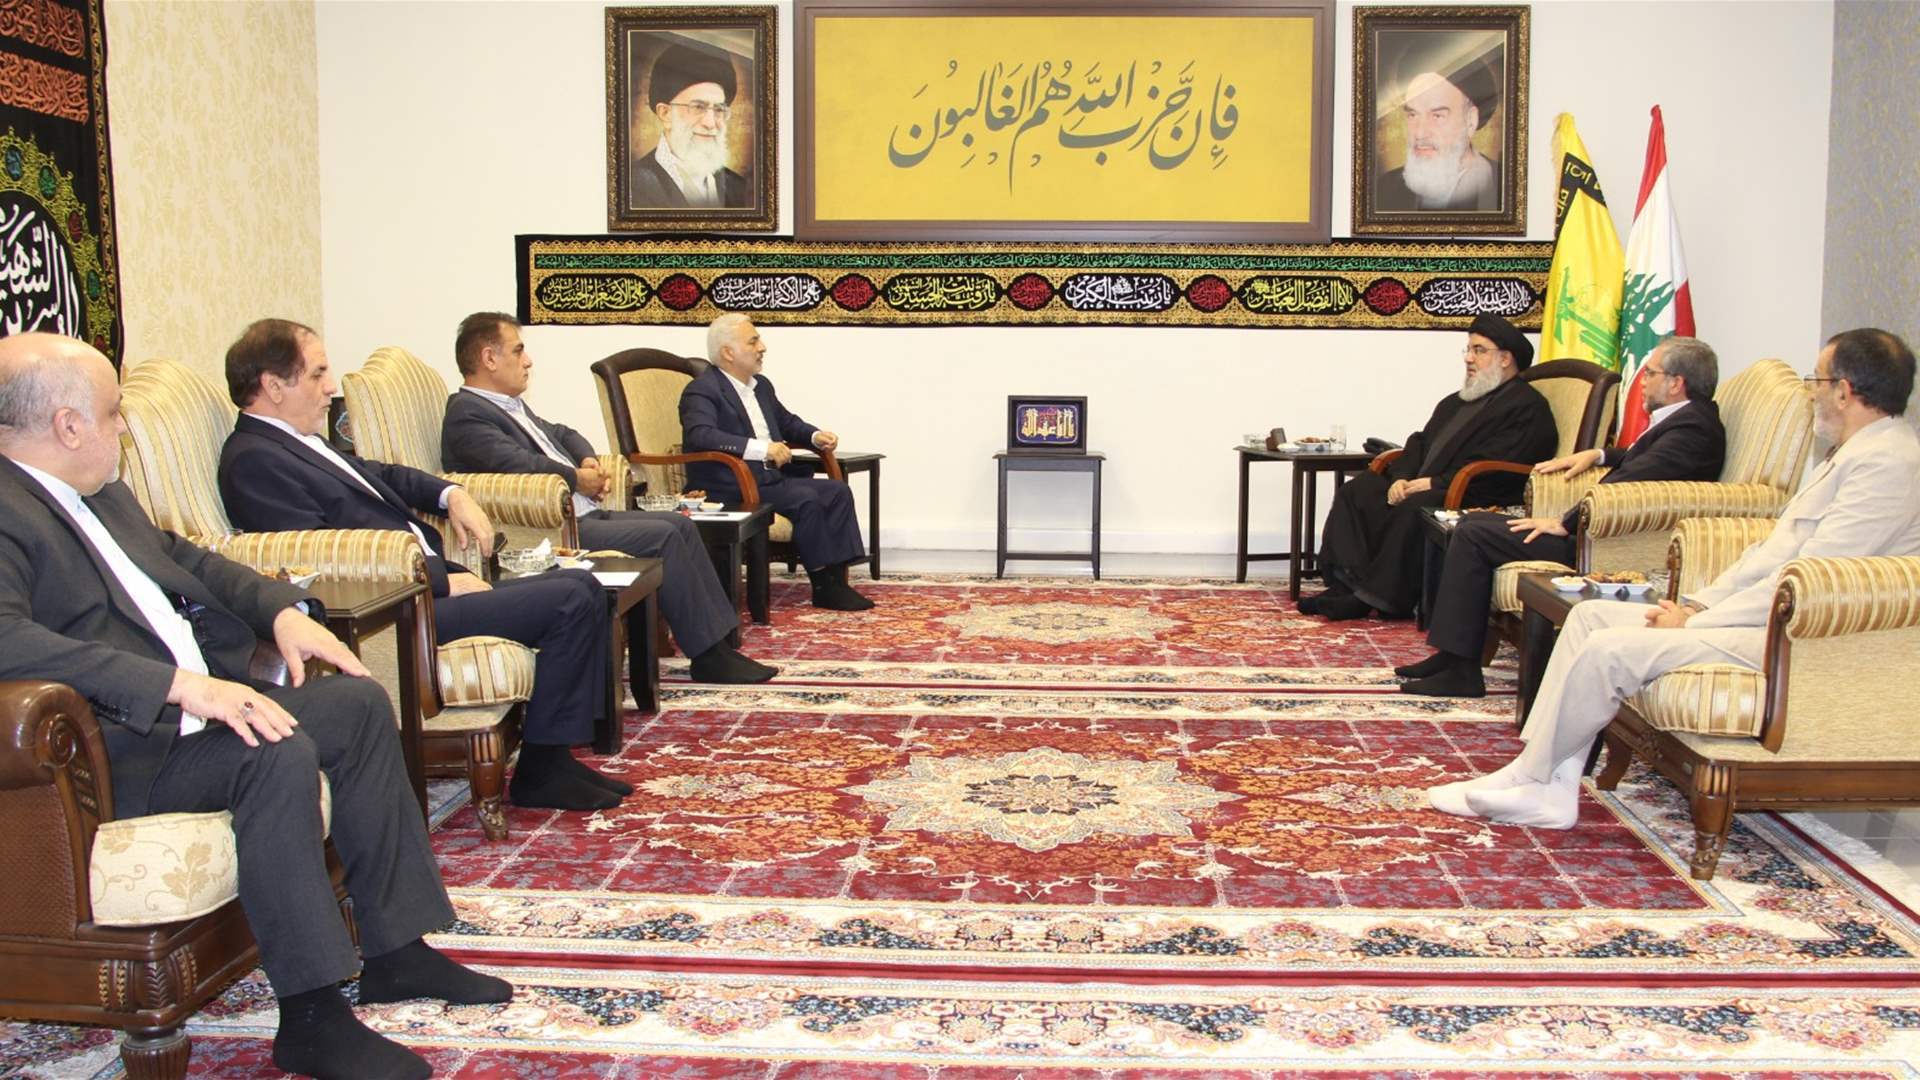 Sayyed Nasrallah meets delegation from National Security and Foreign Policy Committee of Iran parliament